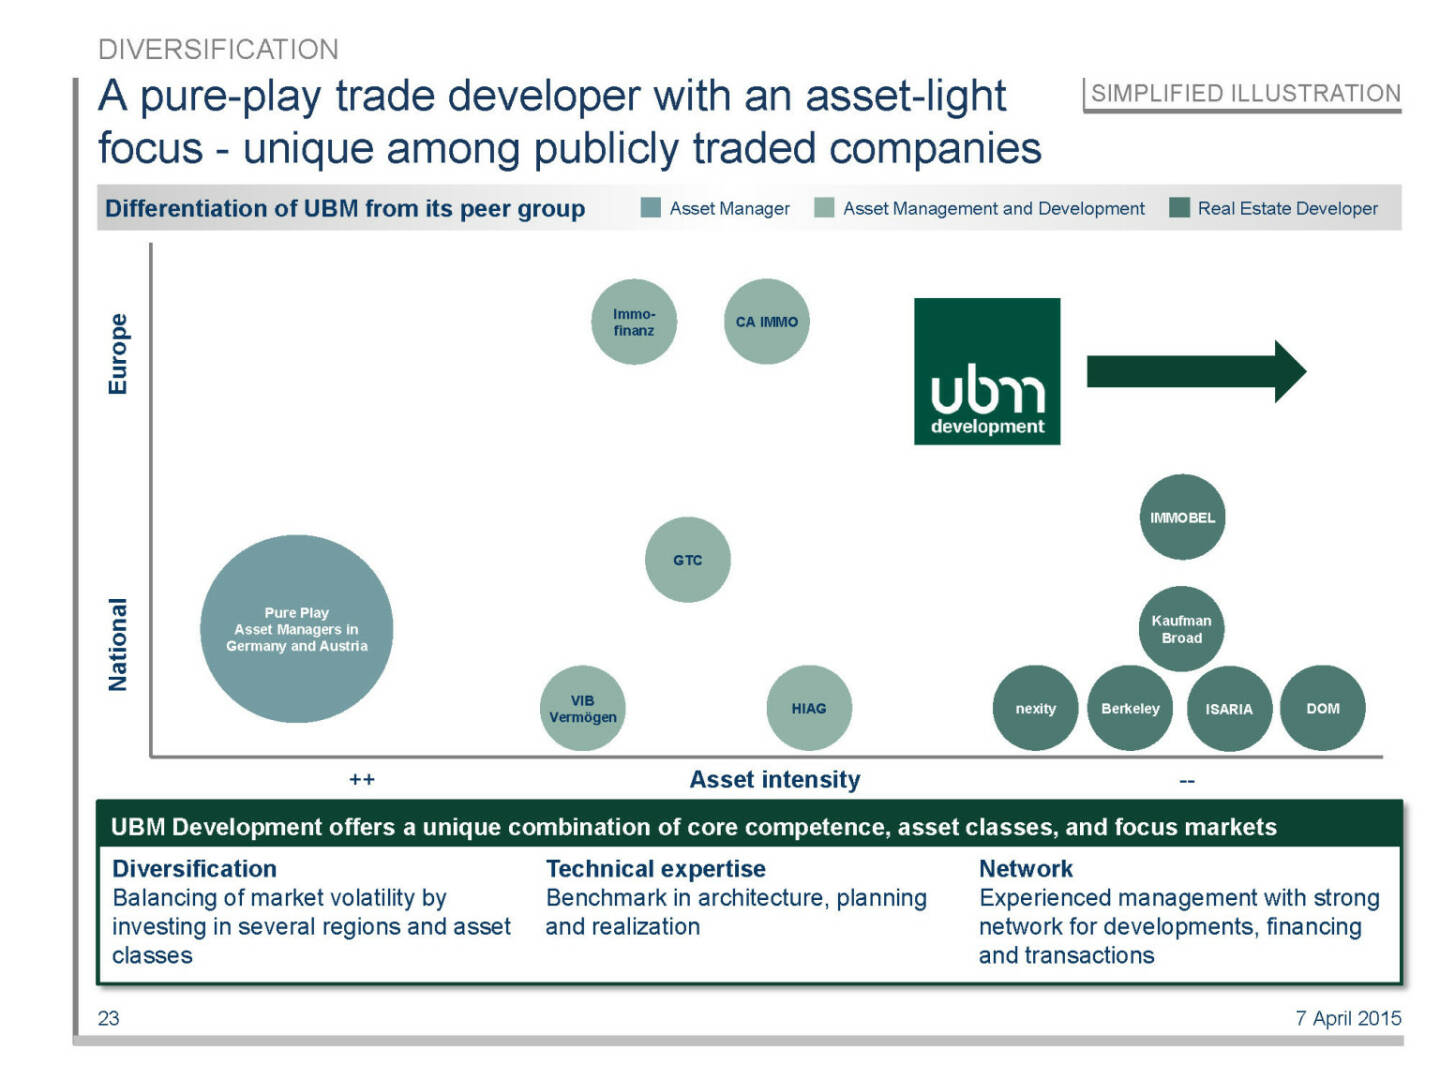 A pure-play trade developer with an asset-light focus - unique among publicly traded companies